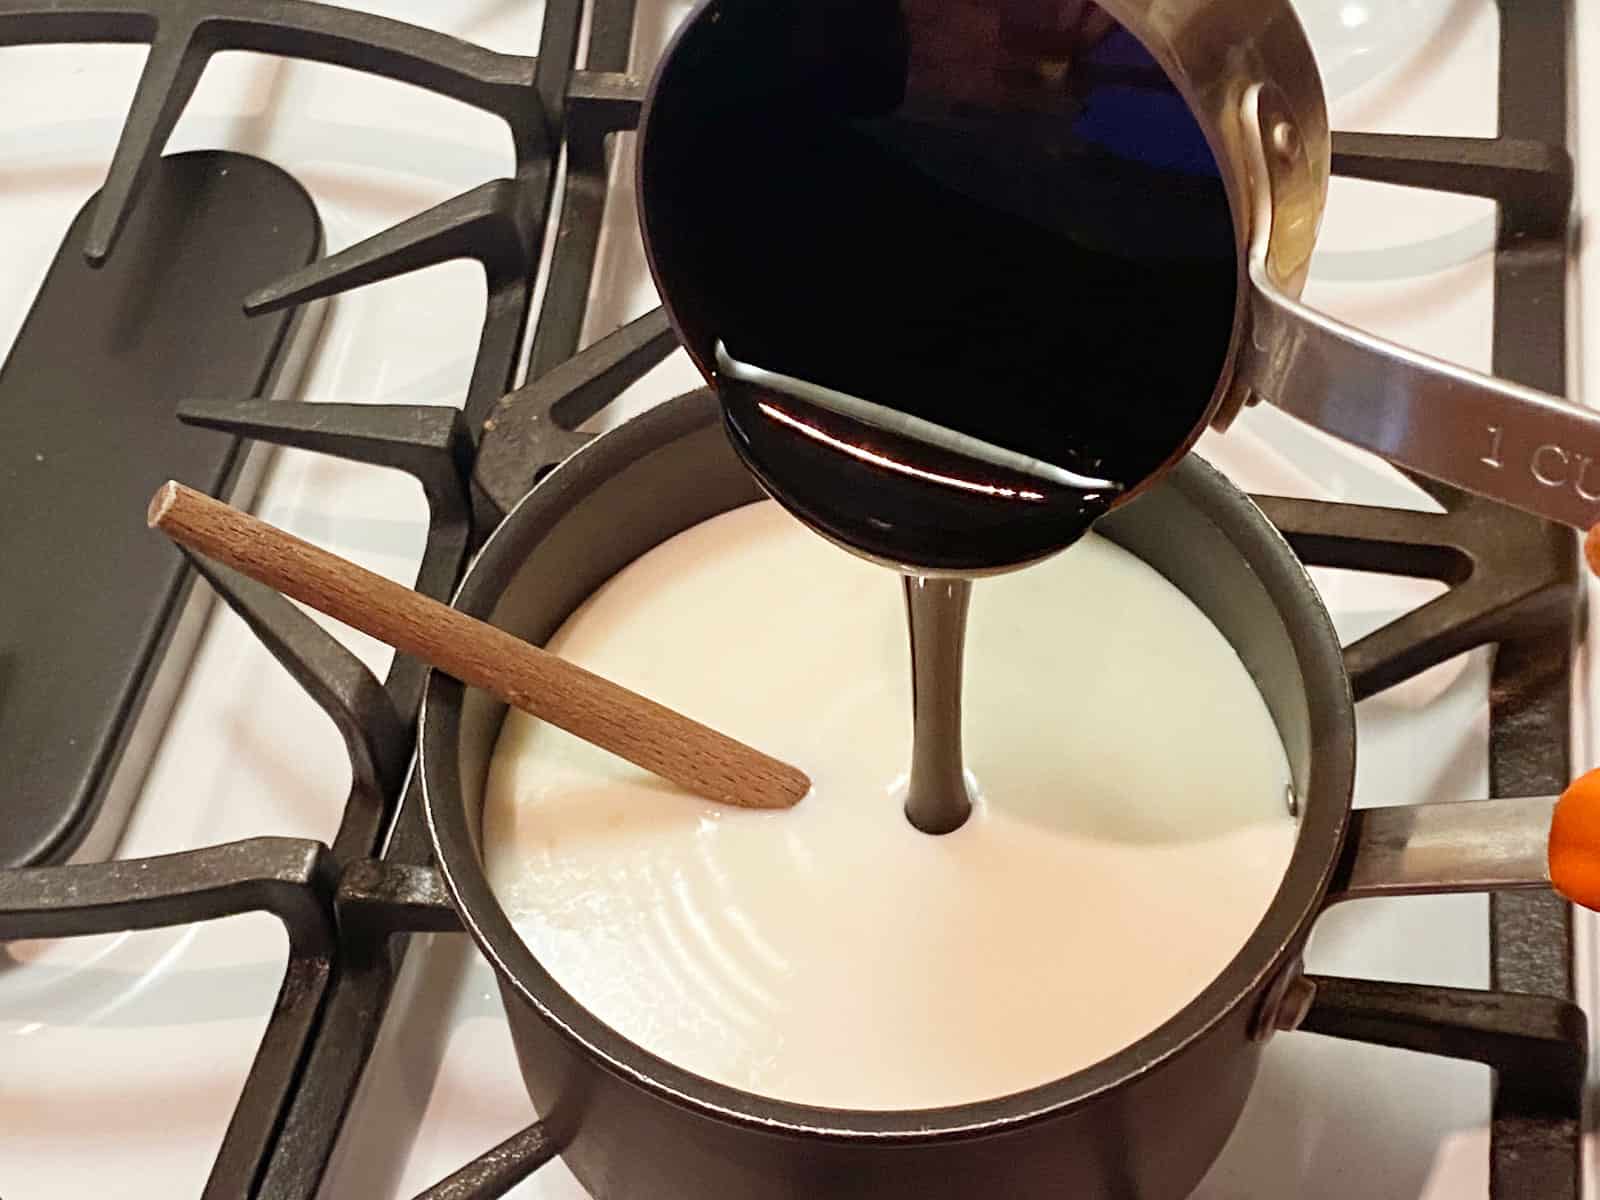 Molasses being poured into milk and cream